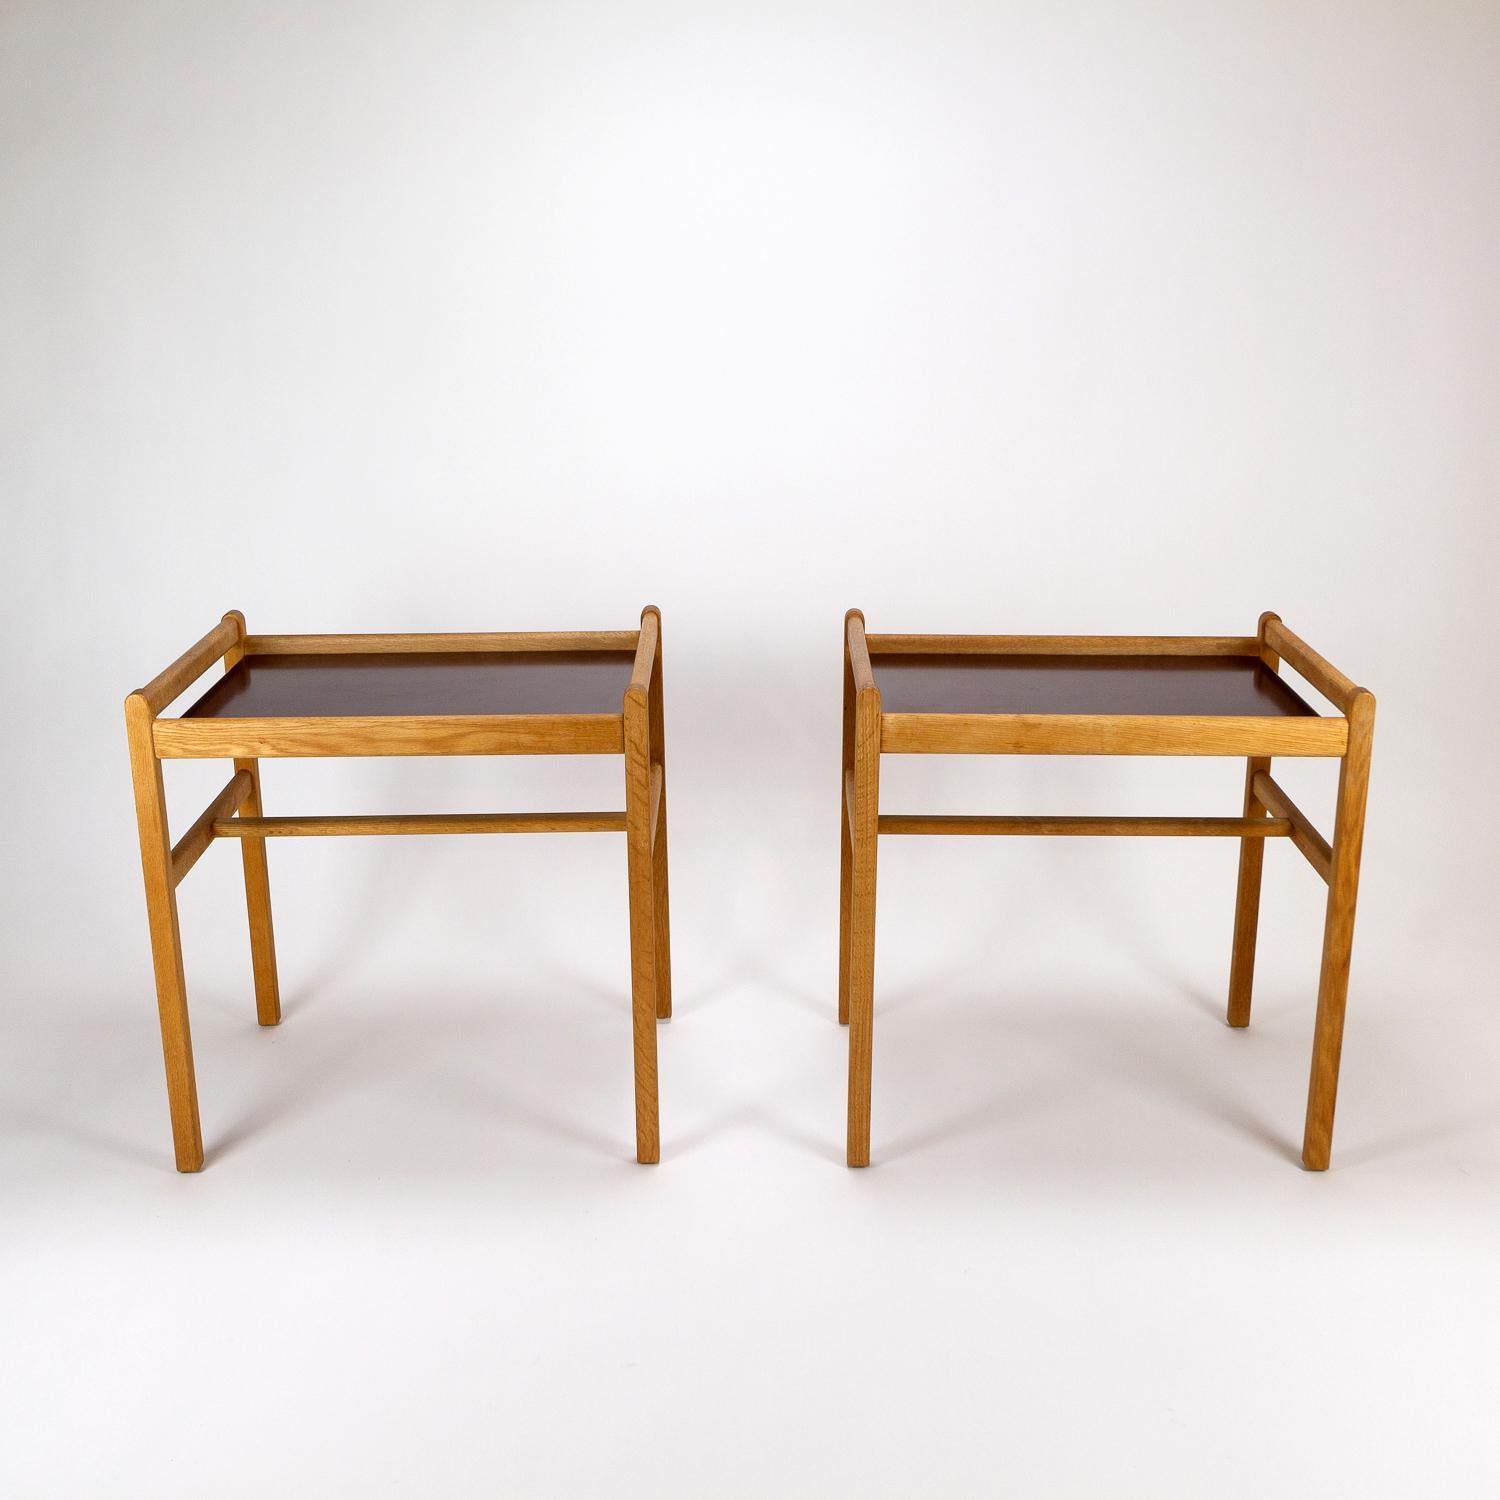 A pair of midcentury Model 5372 oak and lacquered side tables or sofa ends by Børge Mogensen for Fredericia Stolefabrik, Denmark, 1950s. Lacquered tops are colored deep aubergine. A rare find in excellent original condition.

 